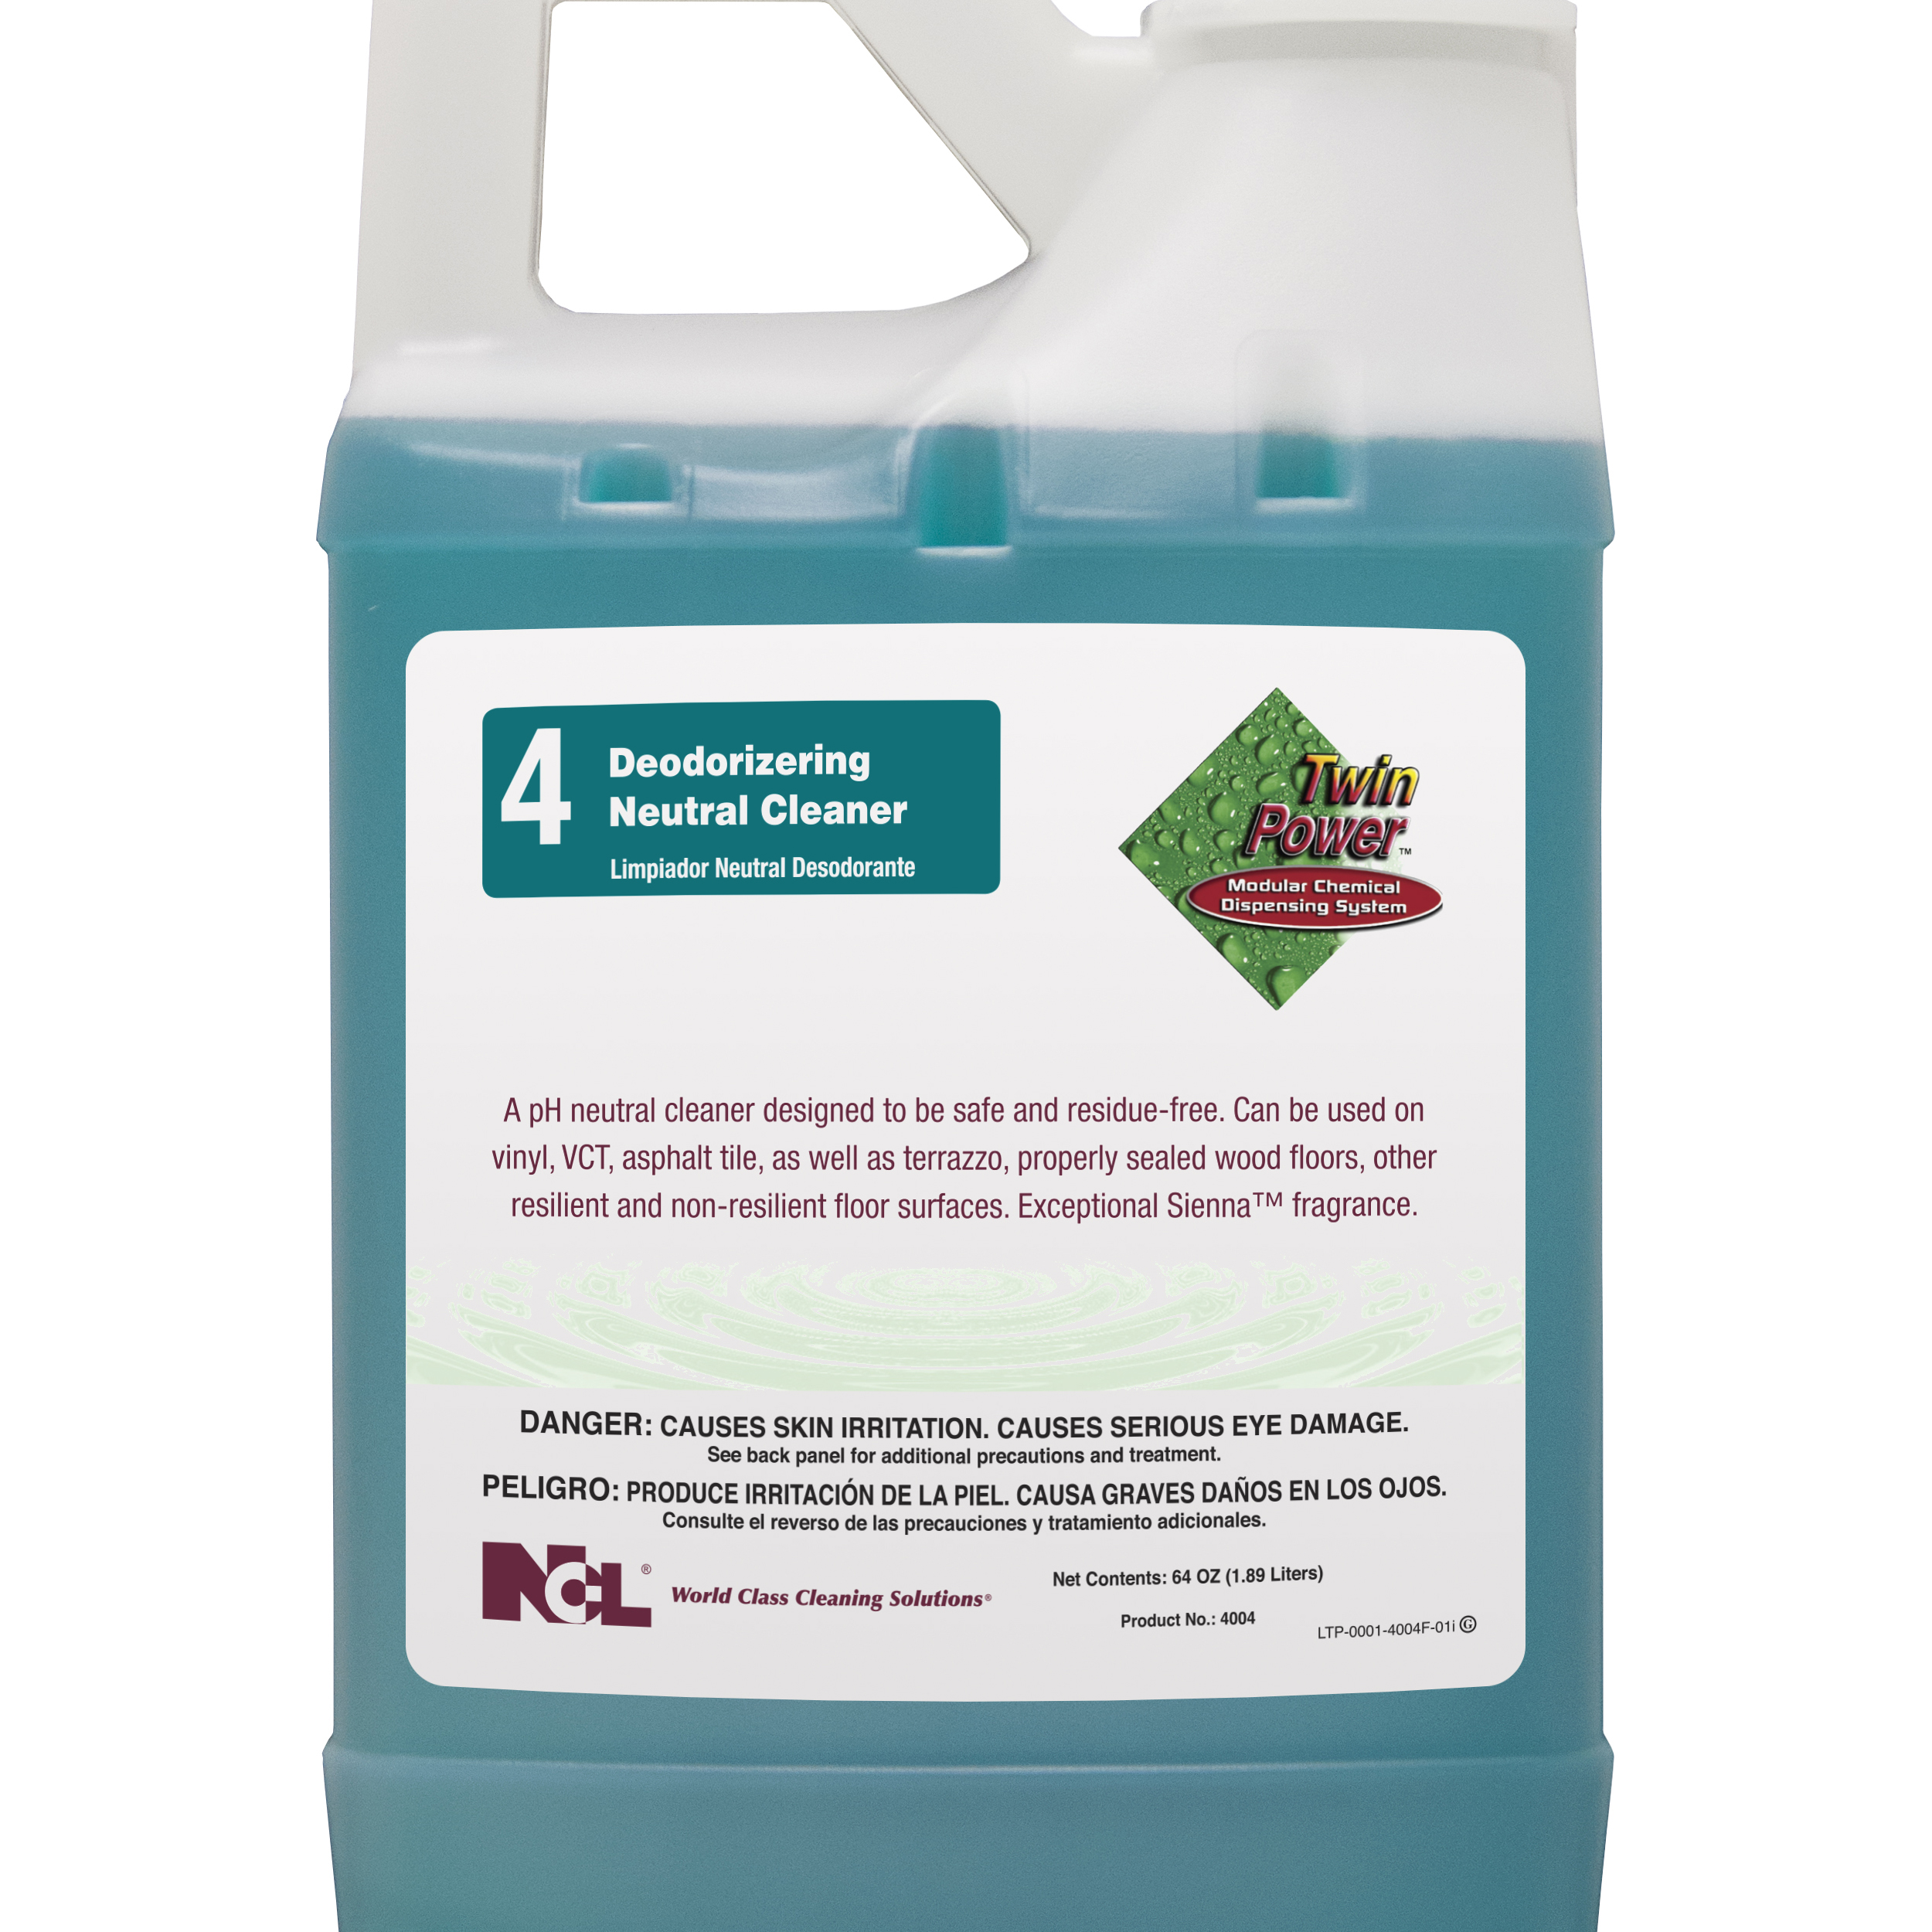  TWIN POWER #4 DEODORIZING NEUTRAL CLEANER 6/64 oz Case (NCL4004-65) 